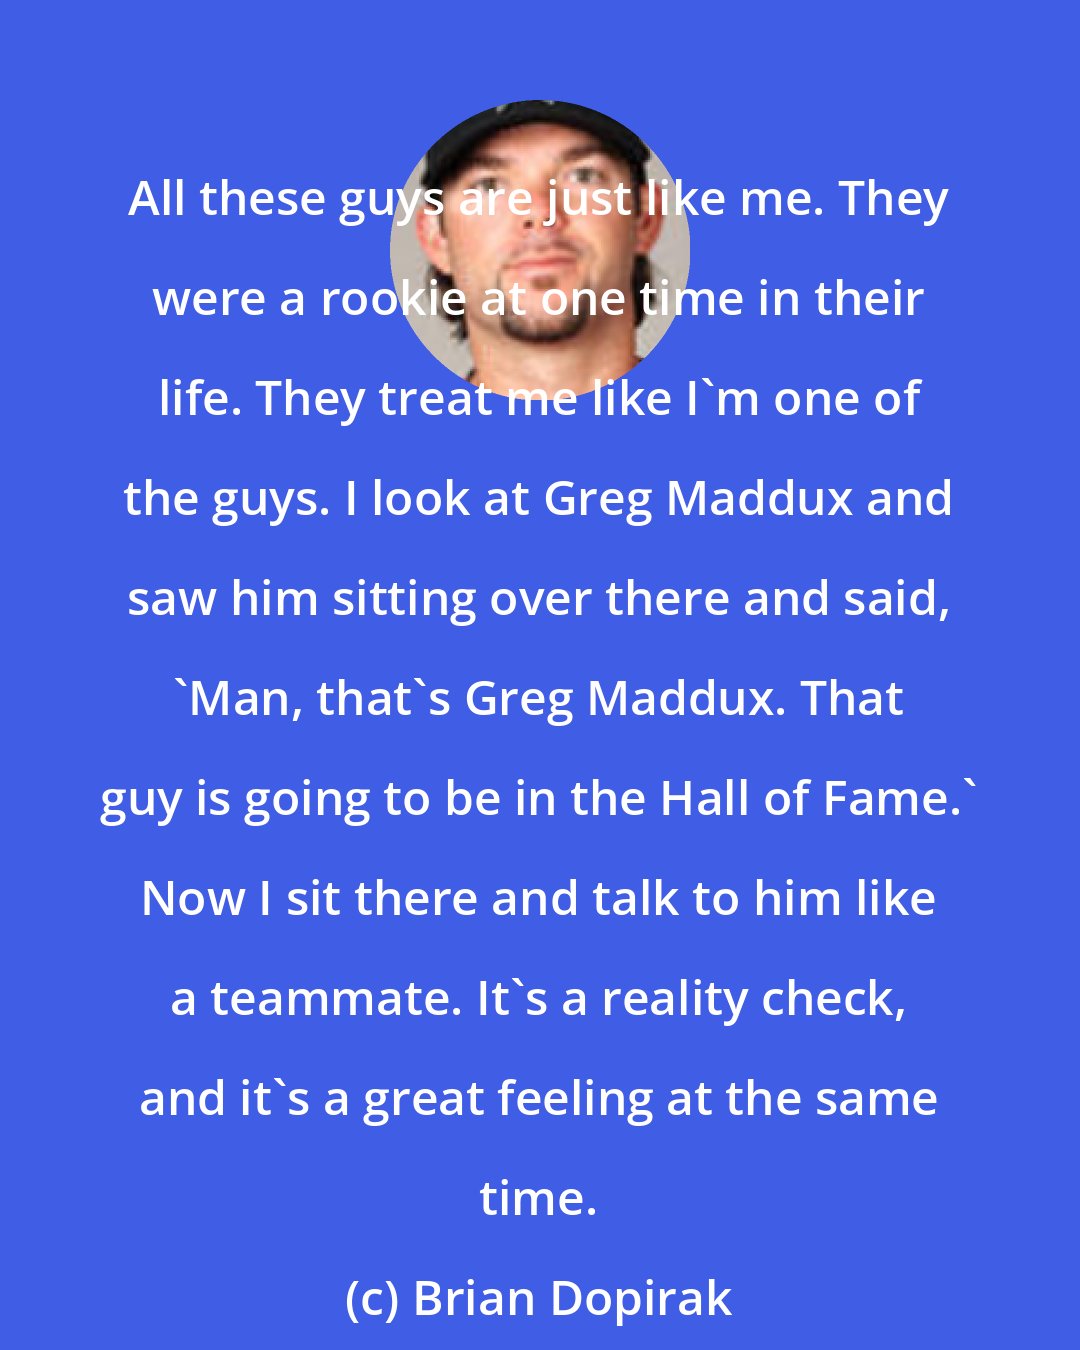 Brian Dopirak: All these guys are just like me. They were a rookie at one time in their life. They treat me like I'm one of the guys. I look at Greg Maddux and saw him sitting over there and said, 'Man, that's Greg Maddux. That guy is going to be in the Hall of Fame.' Now I sit there and talk to him like a teammate. It's a reality check, and it's a great feeling at the same time.